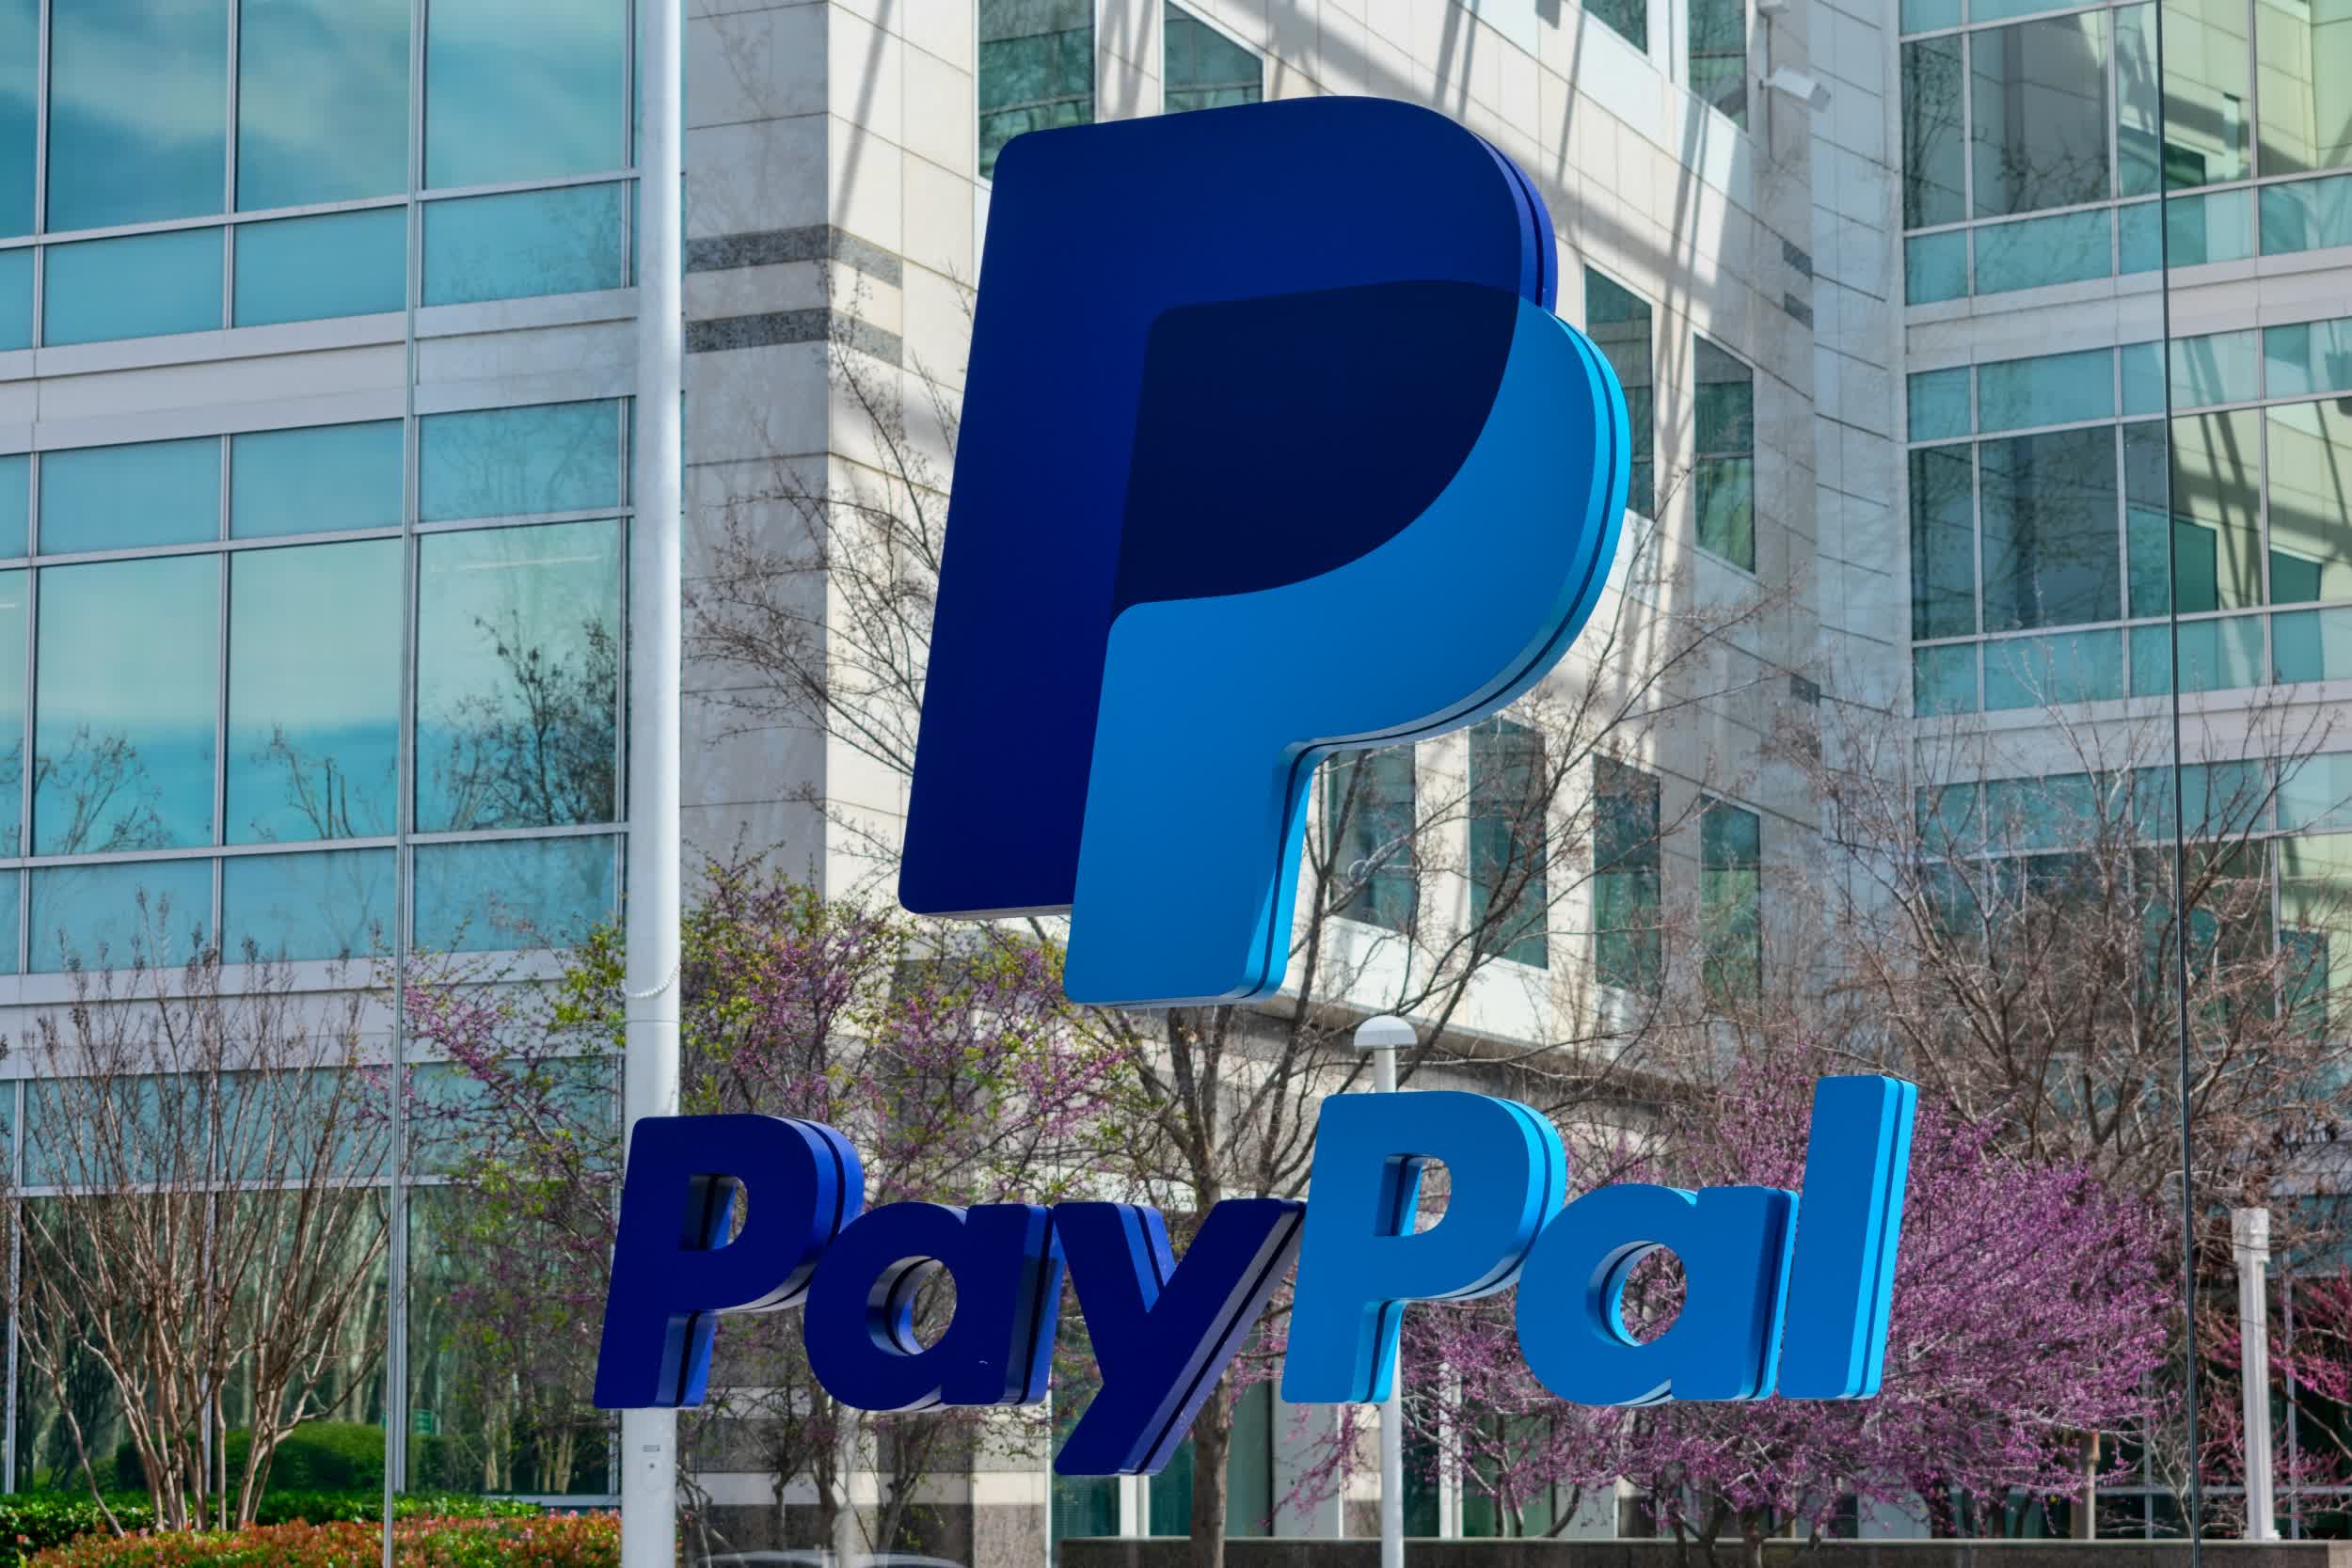 PayPal is considering launching its own asset-backed stablecoin